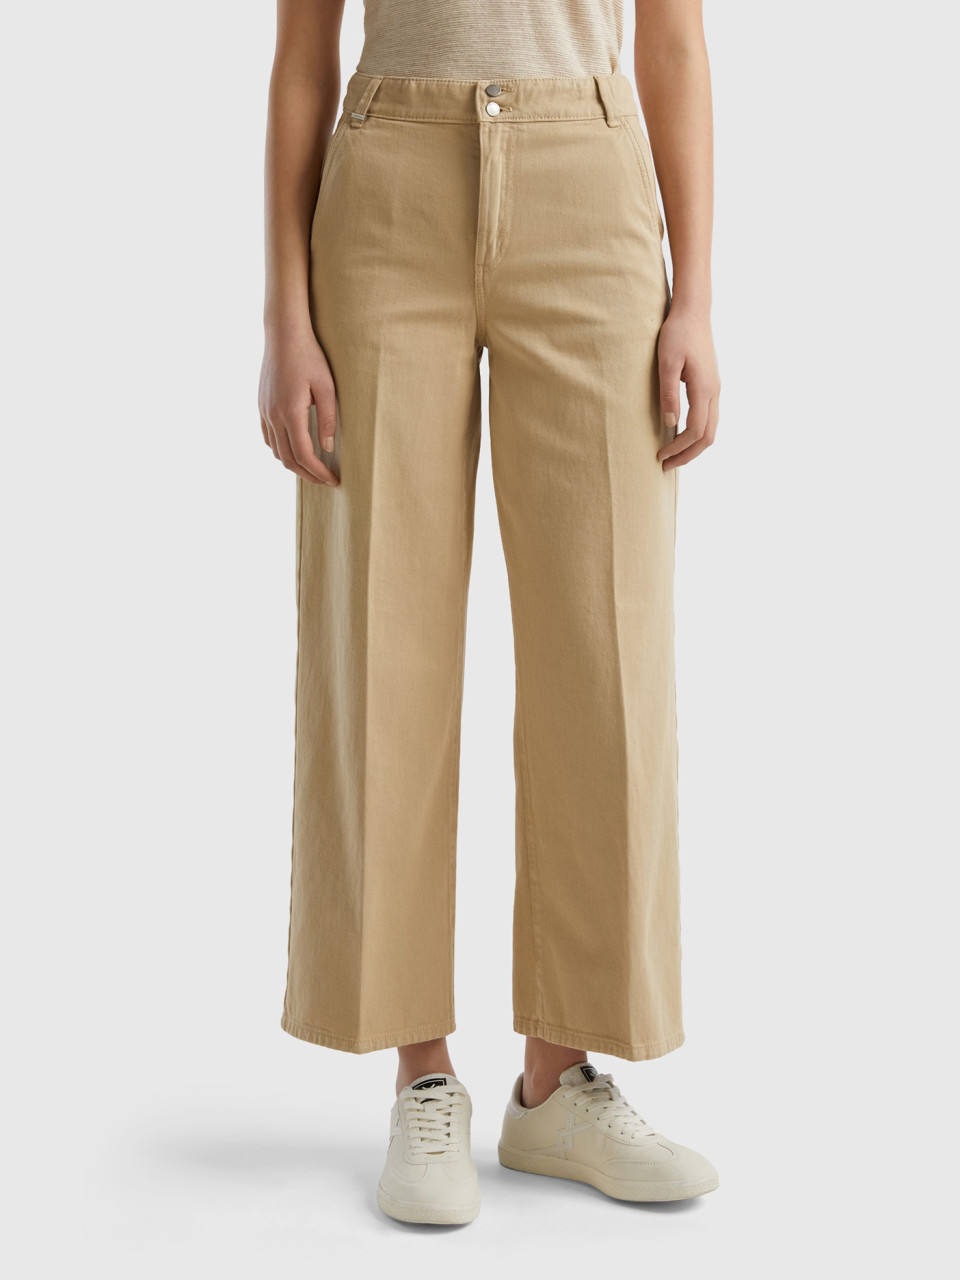 Benetton, High-waisted Trousers With Wide Leg, Camel, Women